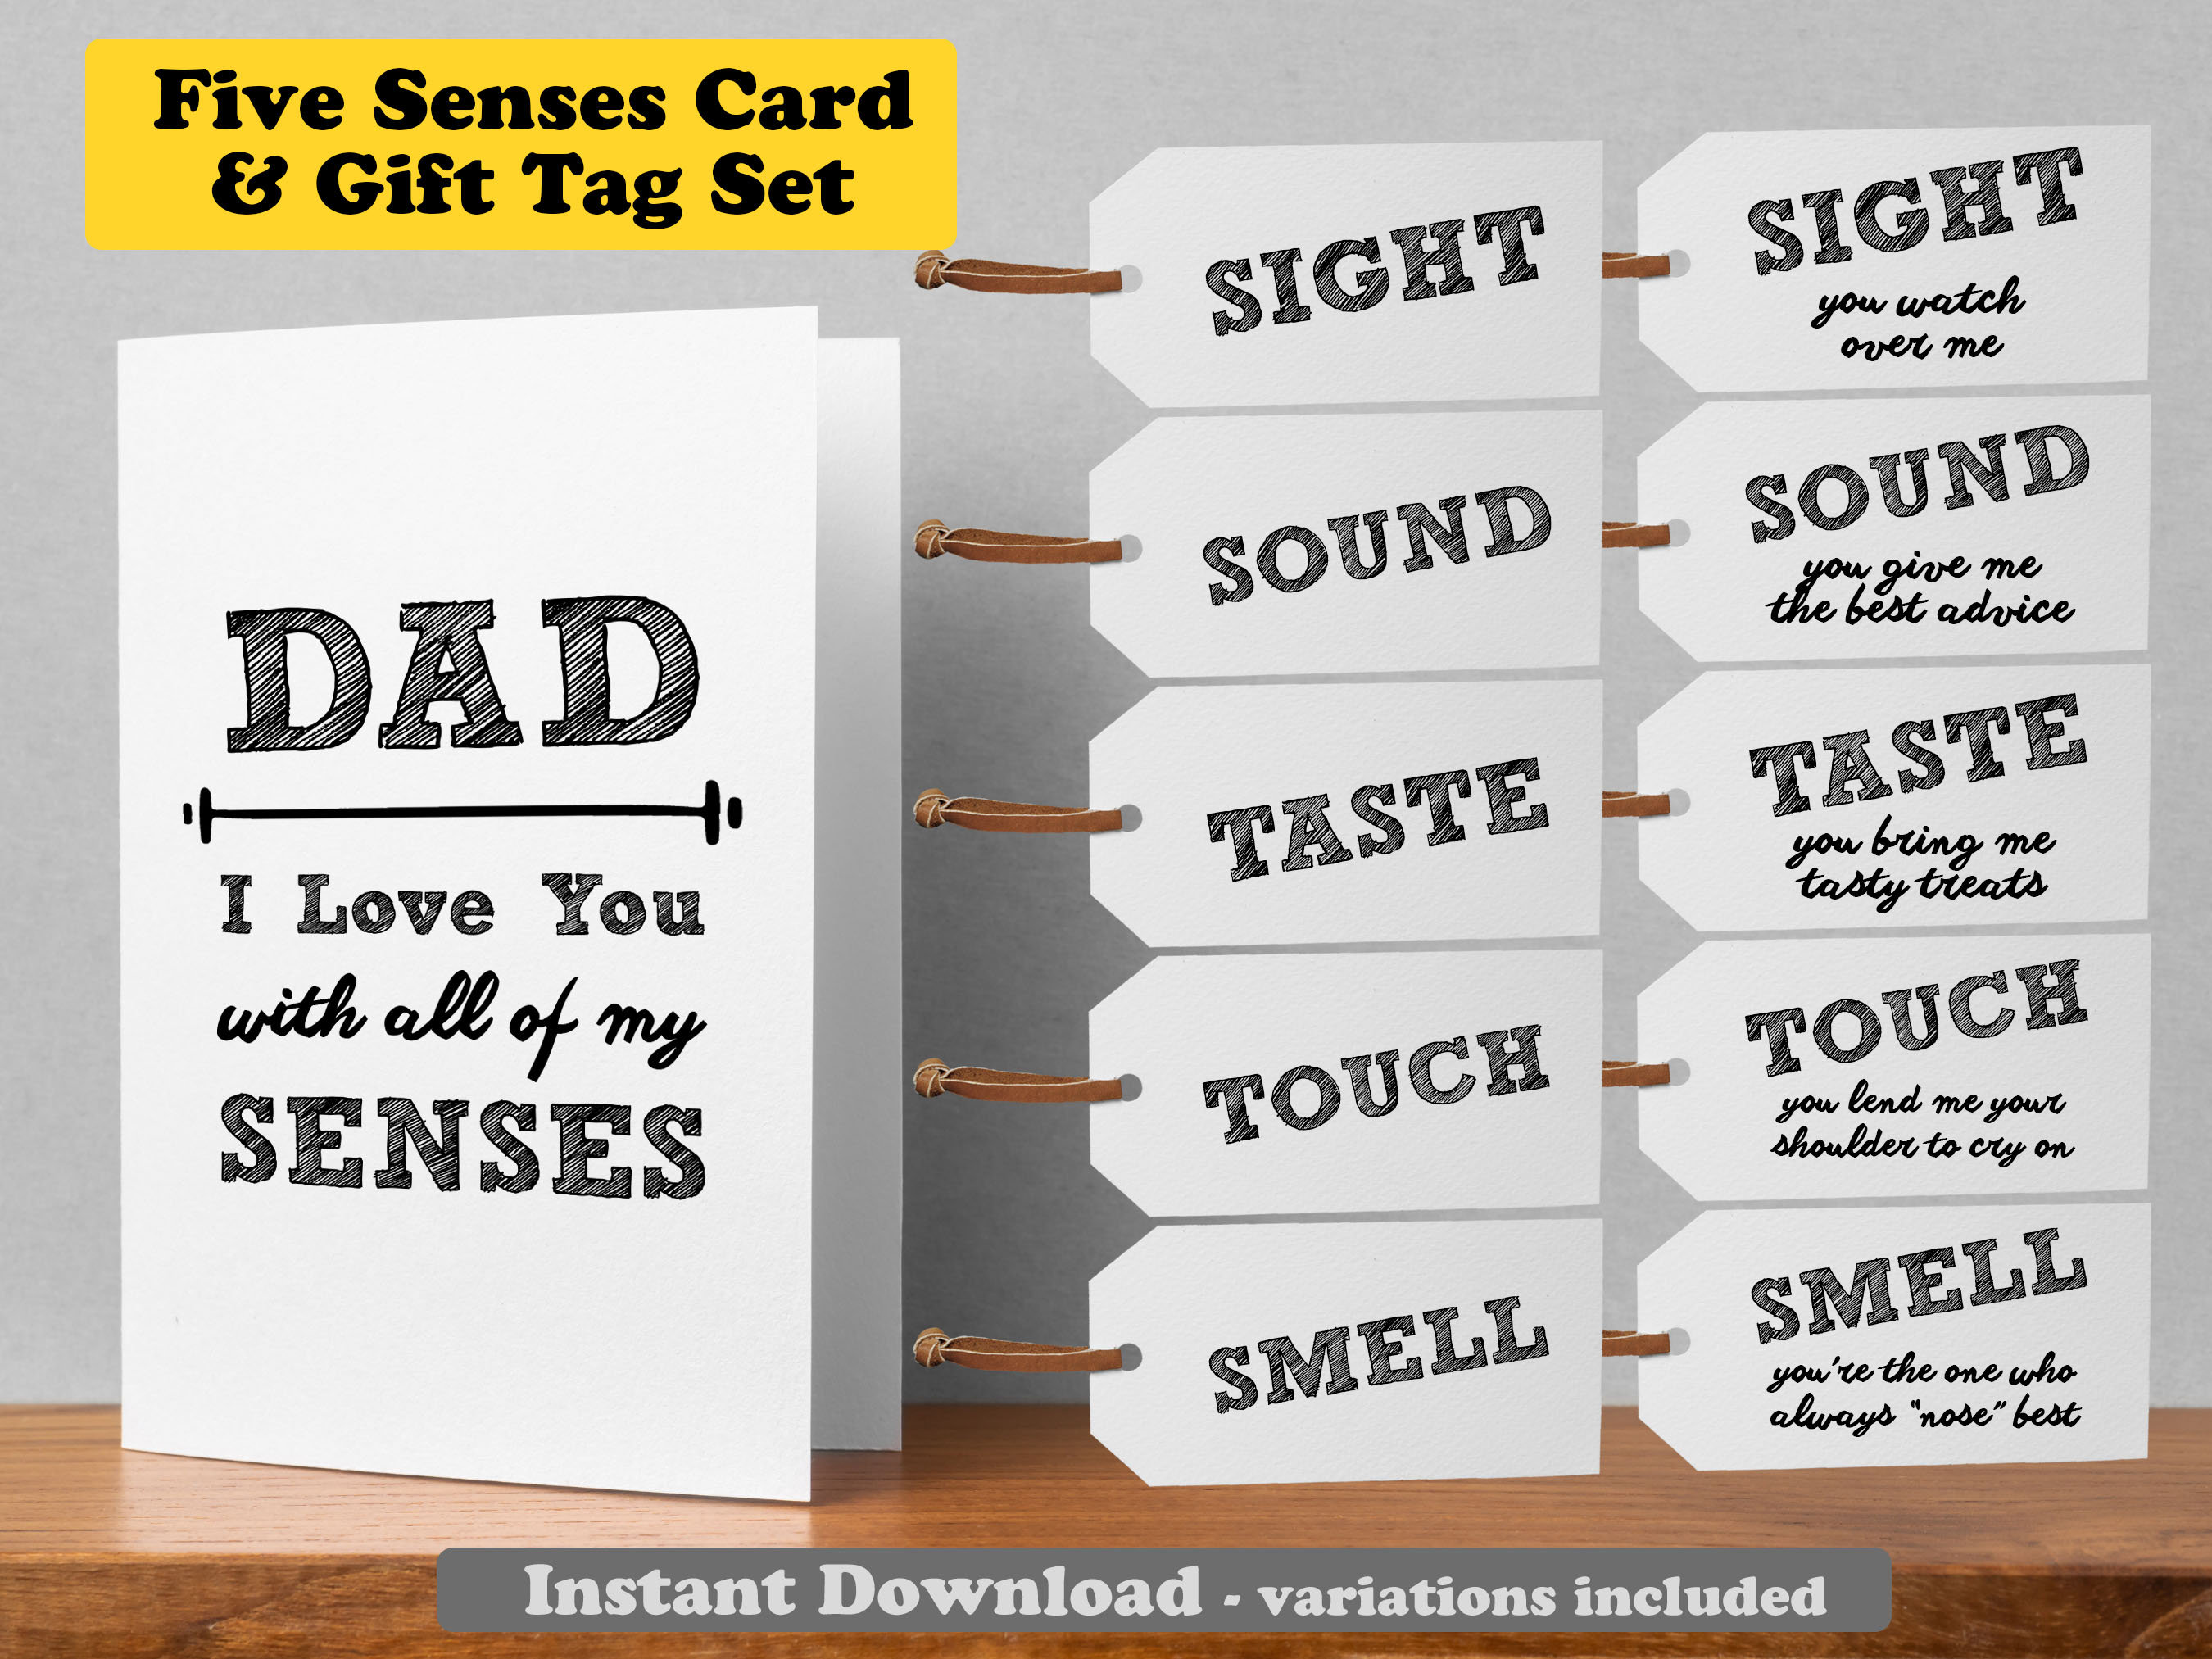 DIY 5 SENSES FATHER'S DAY GIFT IDEAS FOR HIM (DAD) 2022 / SIGHT SOUND SMELL  TOUCH TASTE 